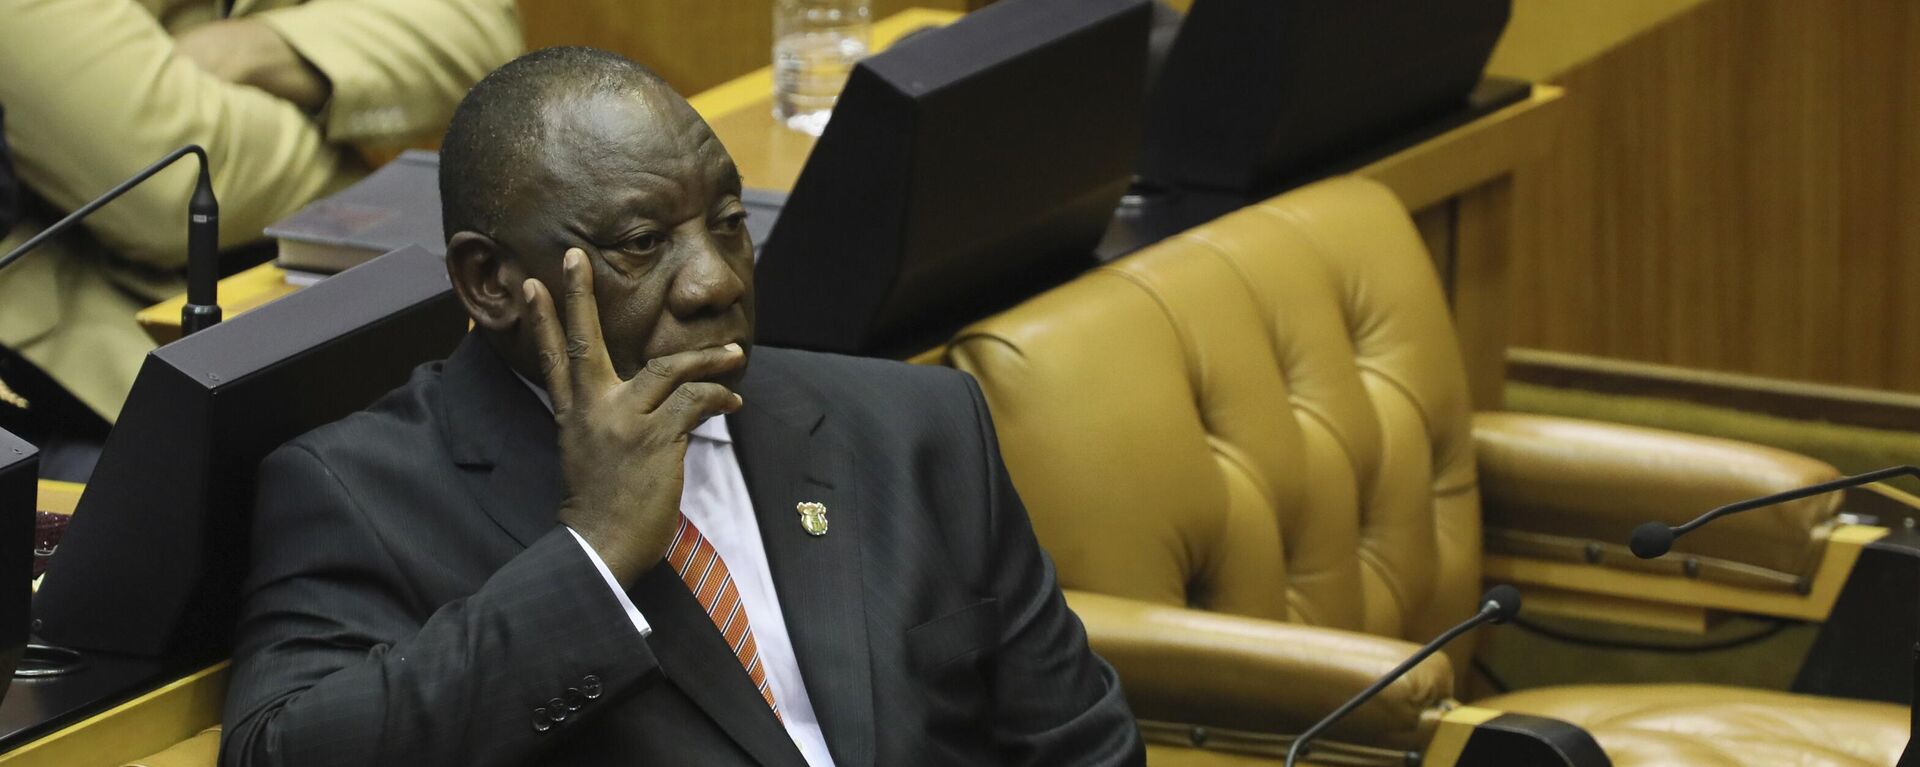 South African President Cyril Ramaphosa waits as members of the Economic Freedom Fighters (EFF) party disrupt parliament proceedings at the State of the Nation Address in Cape Town, South Africa, Thursday, Feb. 13, 2020. - Sputnik International, 1920, 31.08.2022